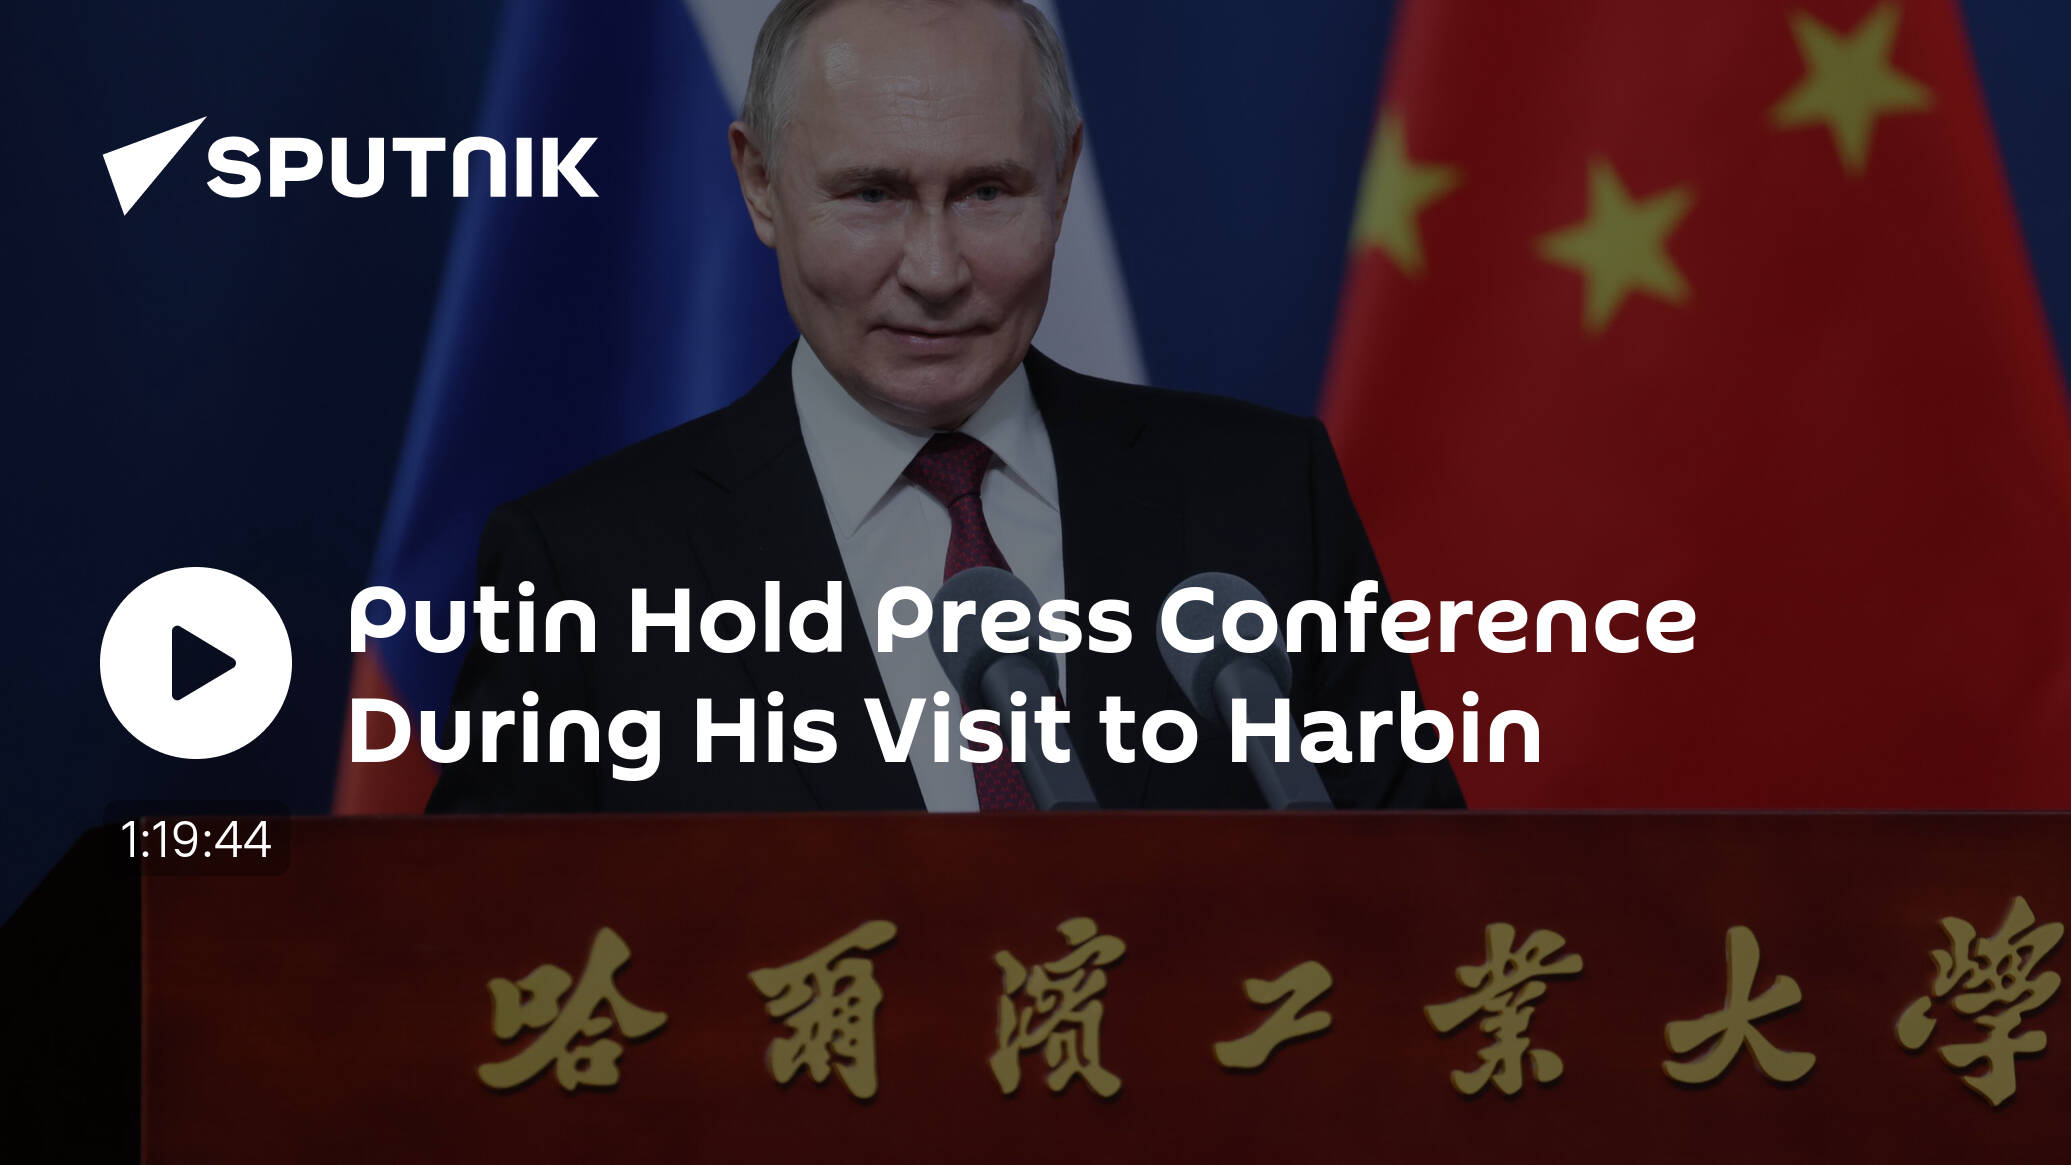 Putin Visits City of Harbin During Stay in China